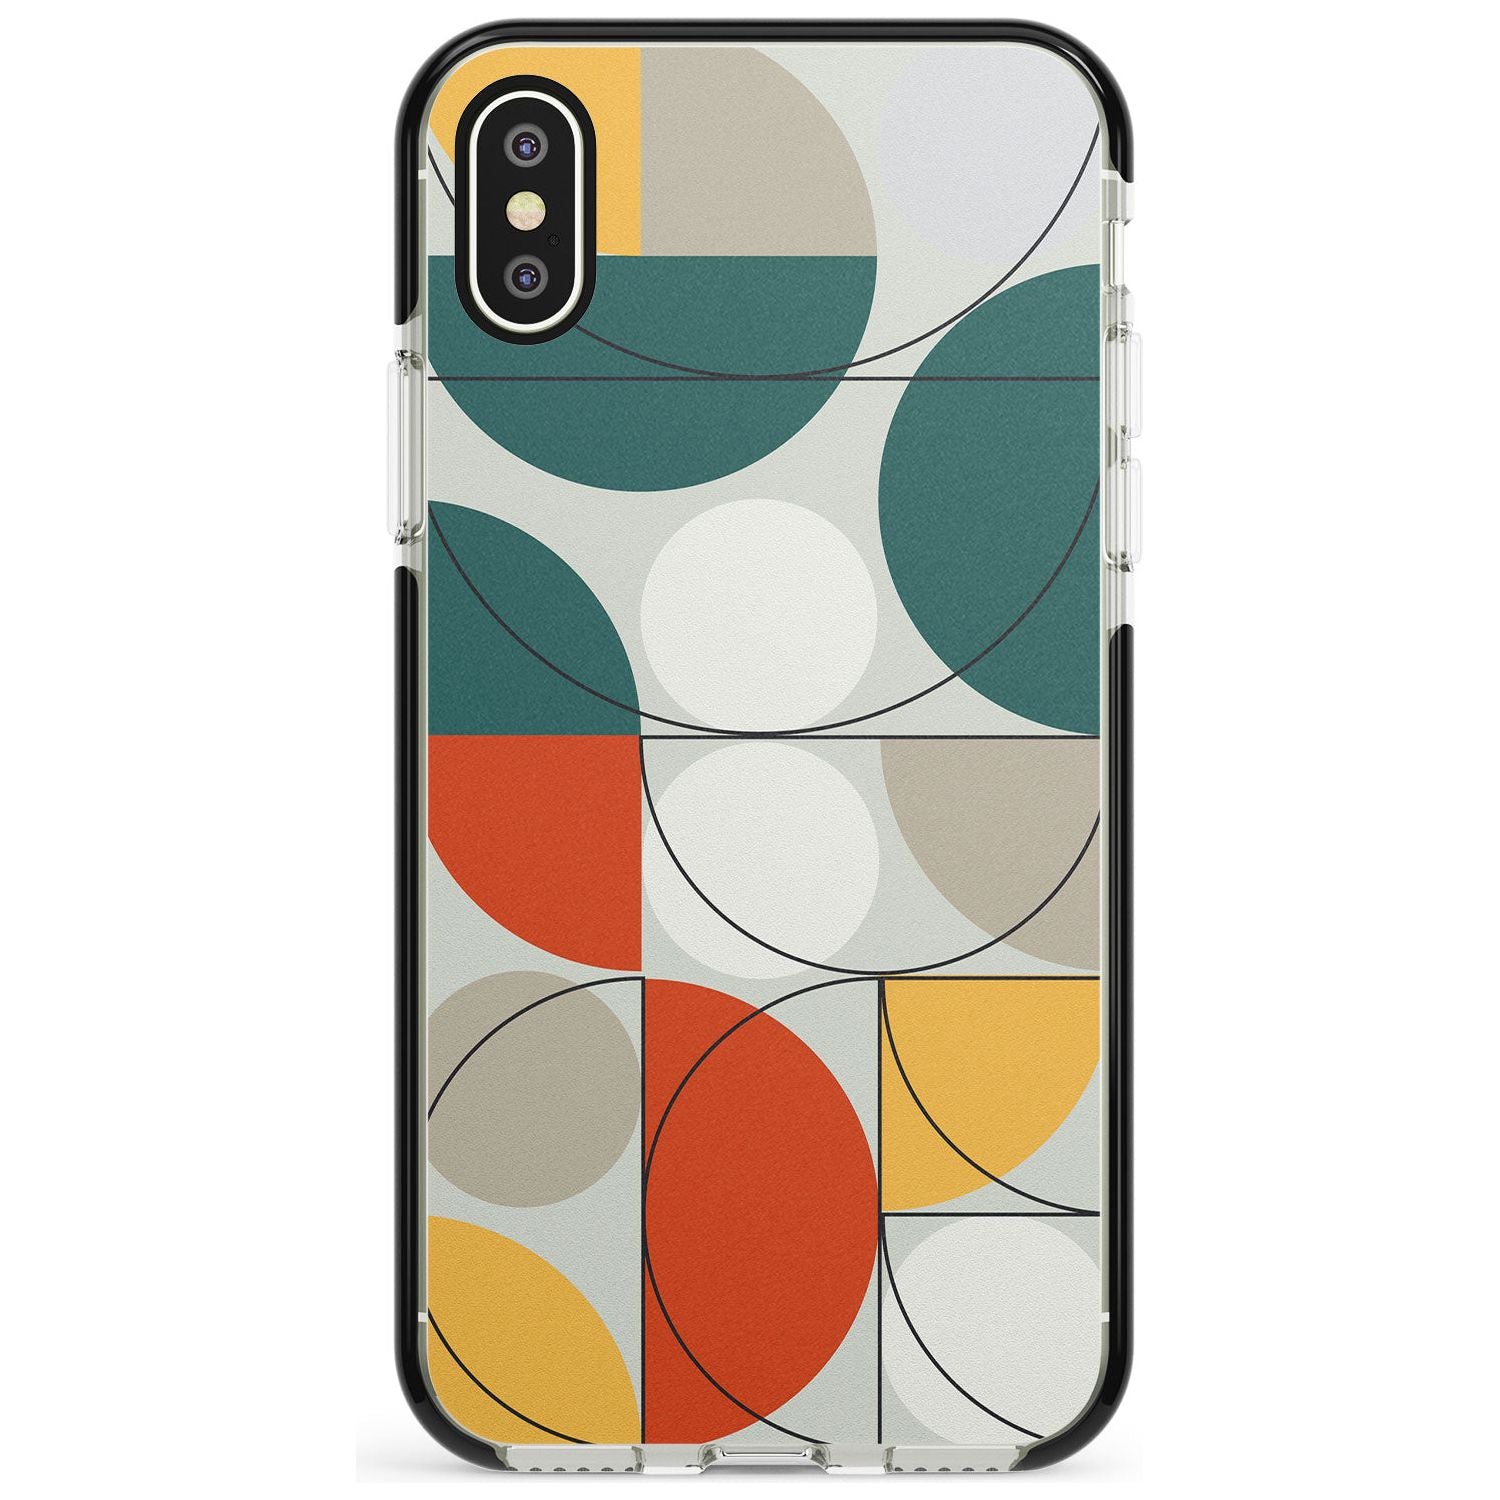 Abstract Half Circles Black Impact Phone Case for iPhone X XS Max XR